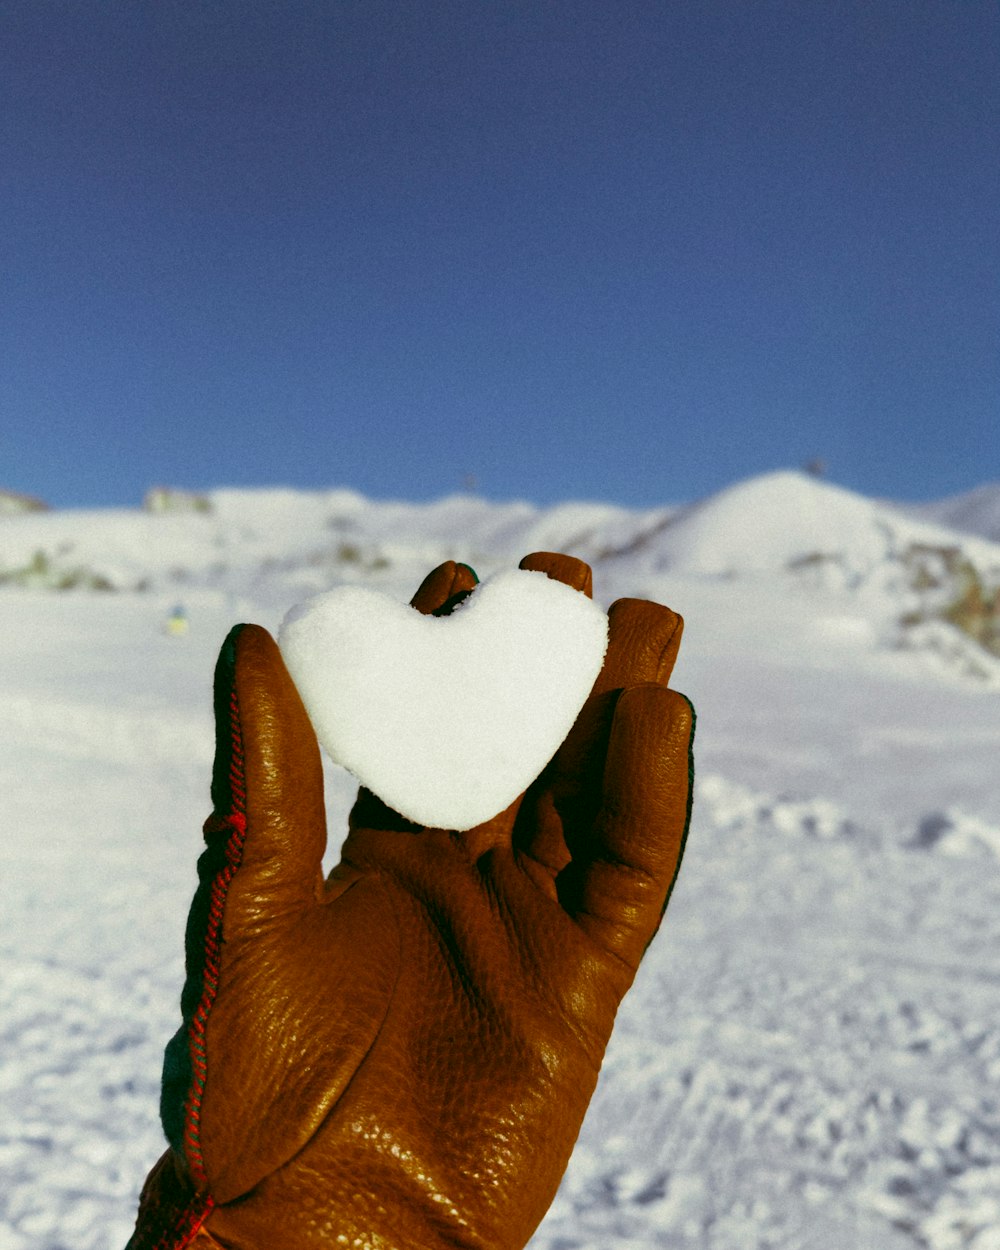 a gloved hand holding a heart shaped object in the snow